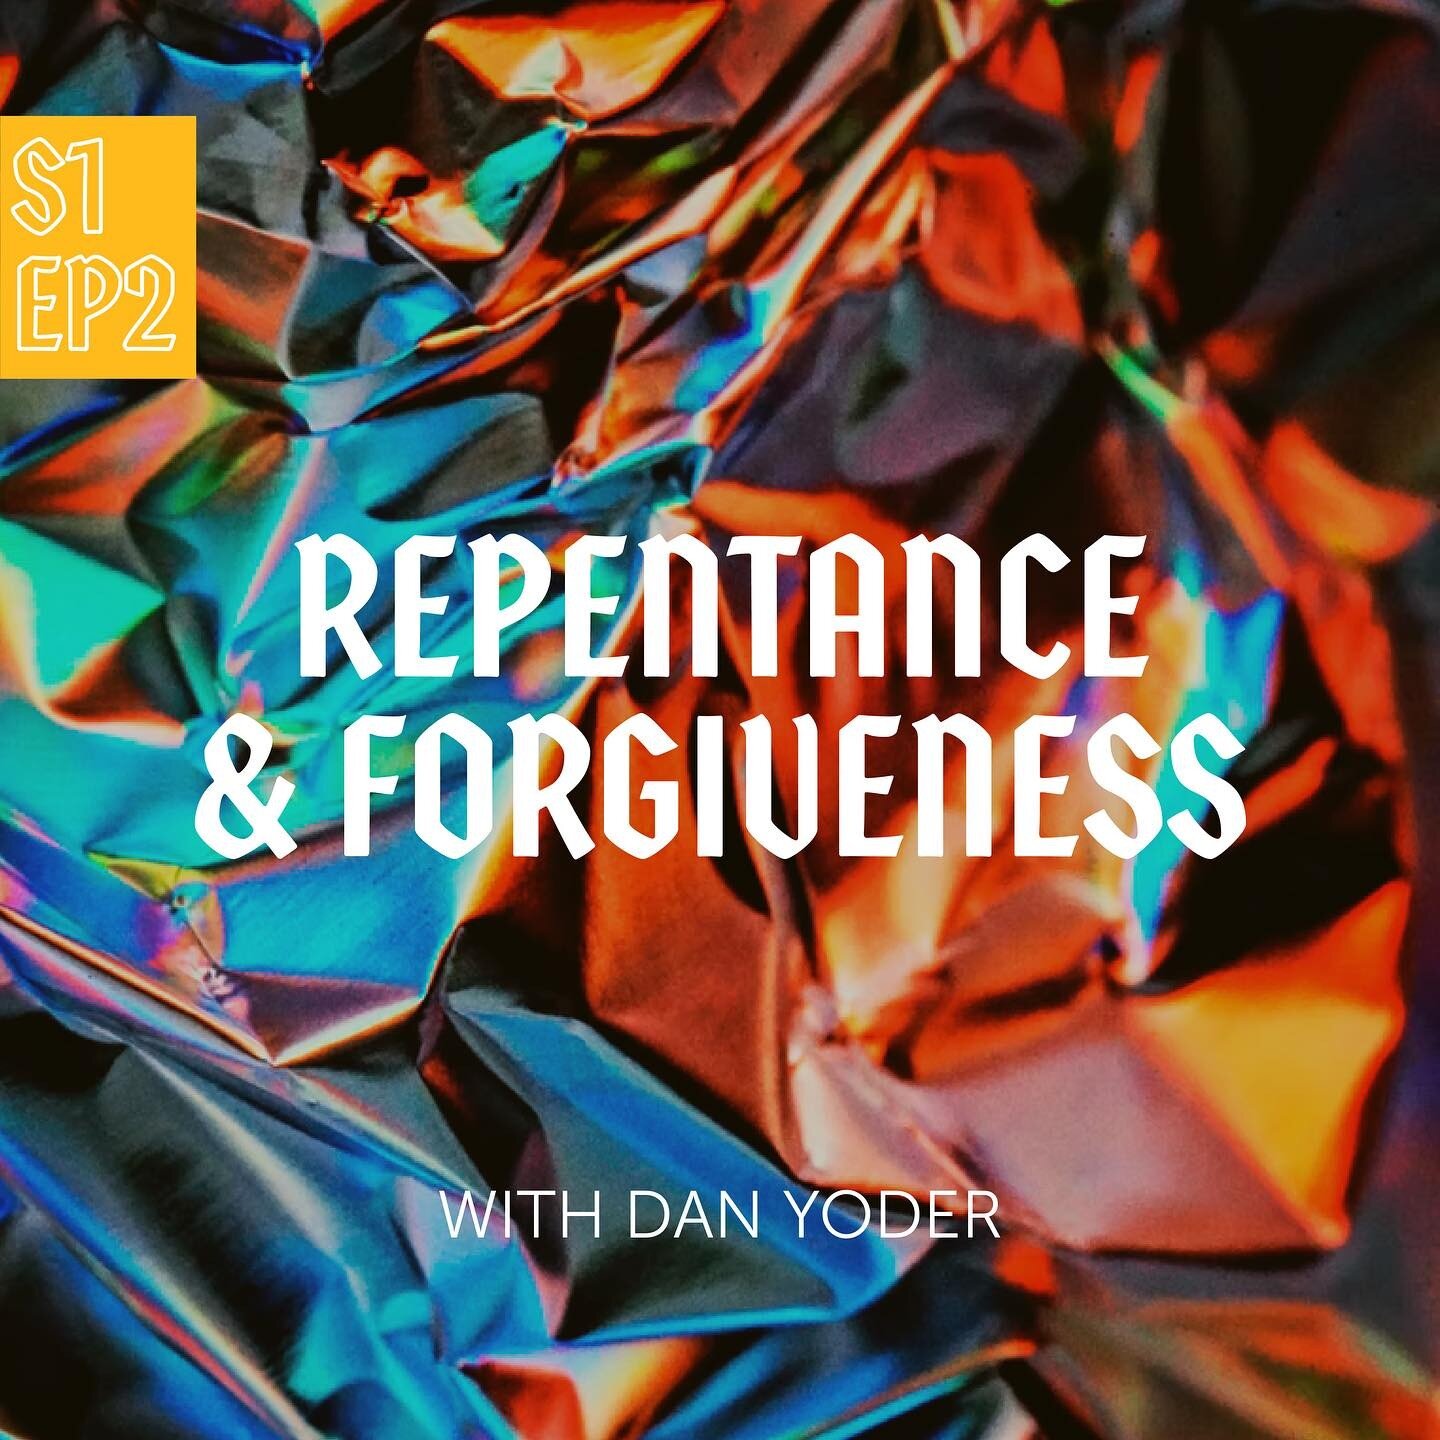 Our second episode is here! Today&rsquo;s guest is Dan Yoder, the Coordinator of Digital Communications at The Vineyard Church (@vineyardmishawaka). In this episode, Addison and Dan discuss importance of repentance and forgiveness as followers of Chr